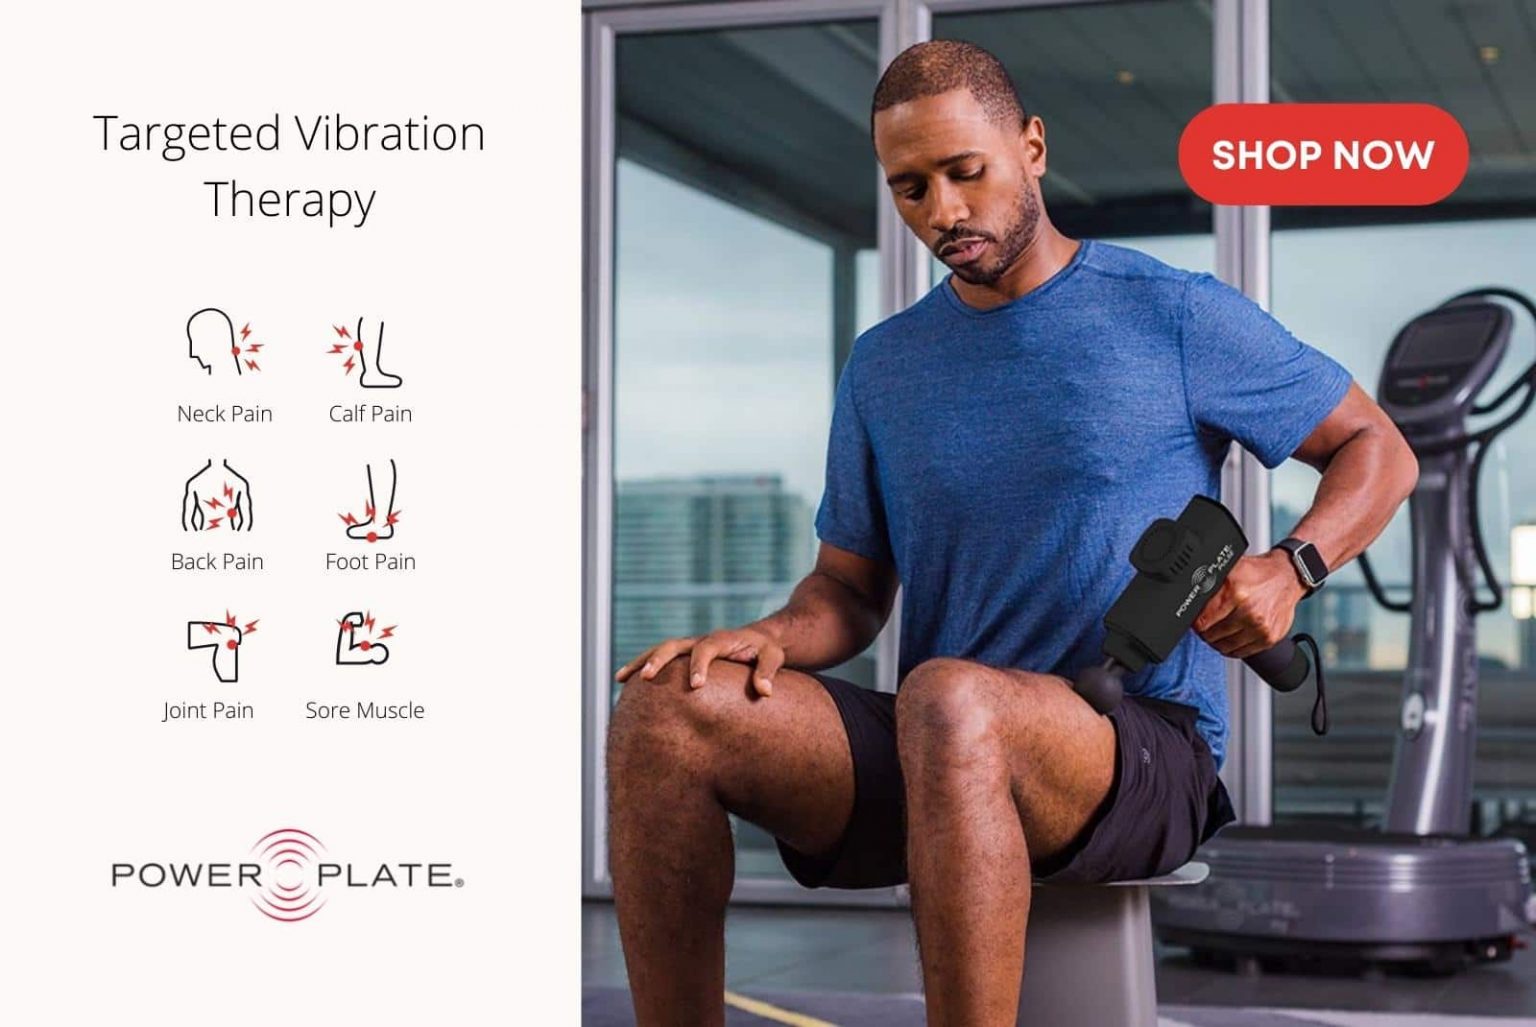 Power Plate Pulse - targeted vibration therapy for relief from pain and faster muscle recovery